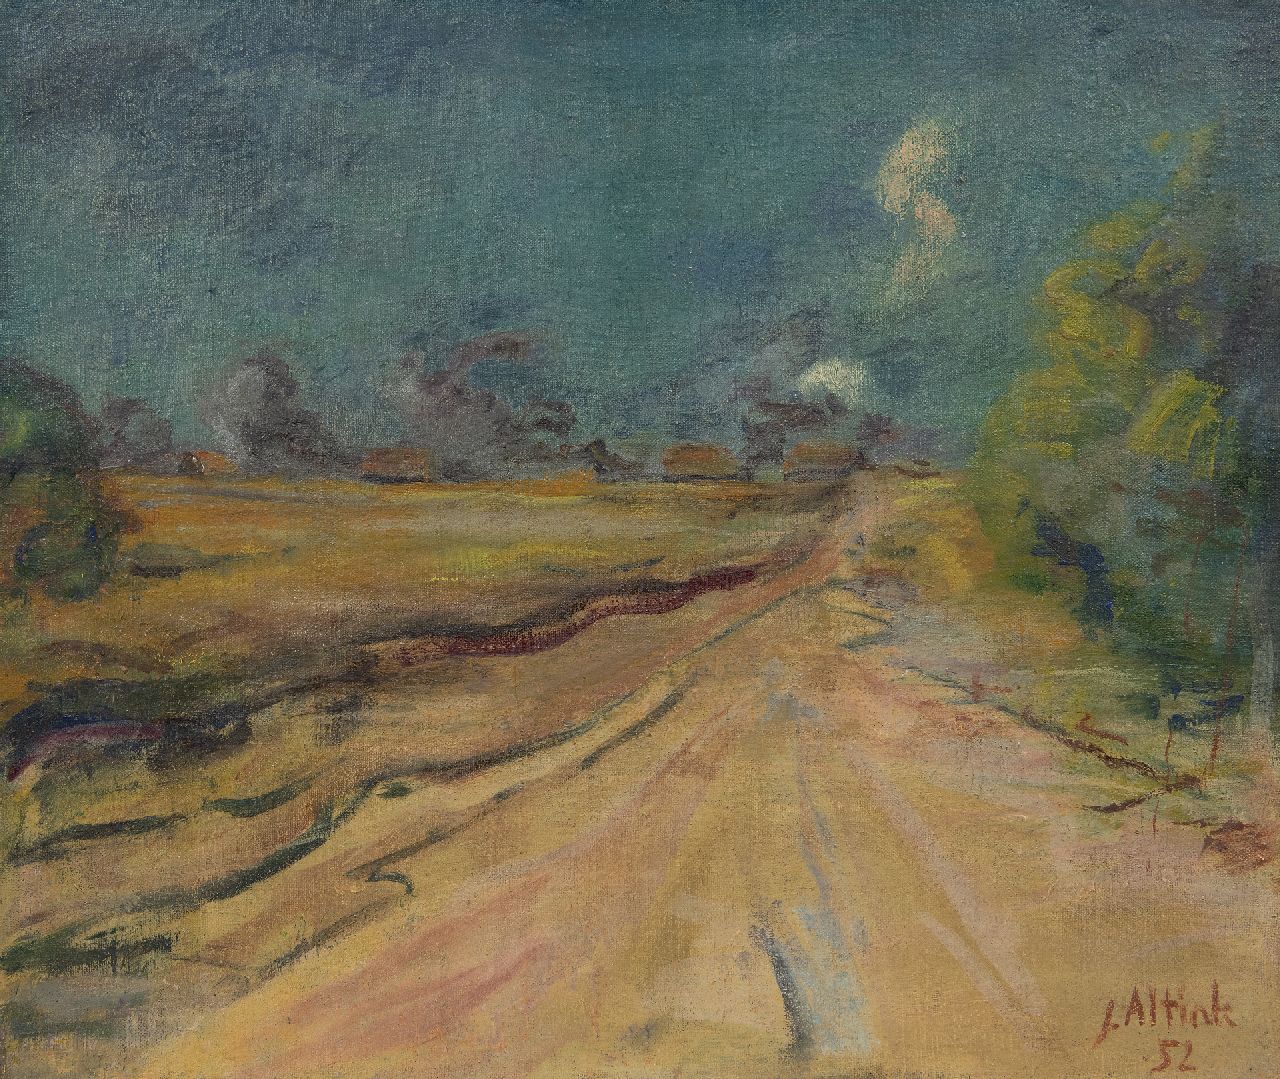 Altink J.  | Jan Altink | Paintings offered for sale | Country road in the summer, oil on canvas 50.3 x 60.1 cm, signed l.r. and dated '52